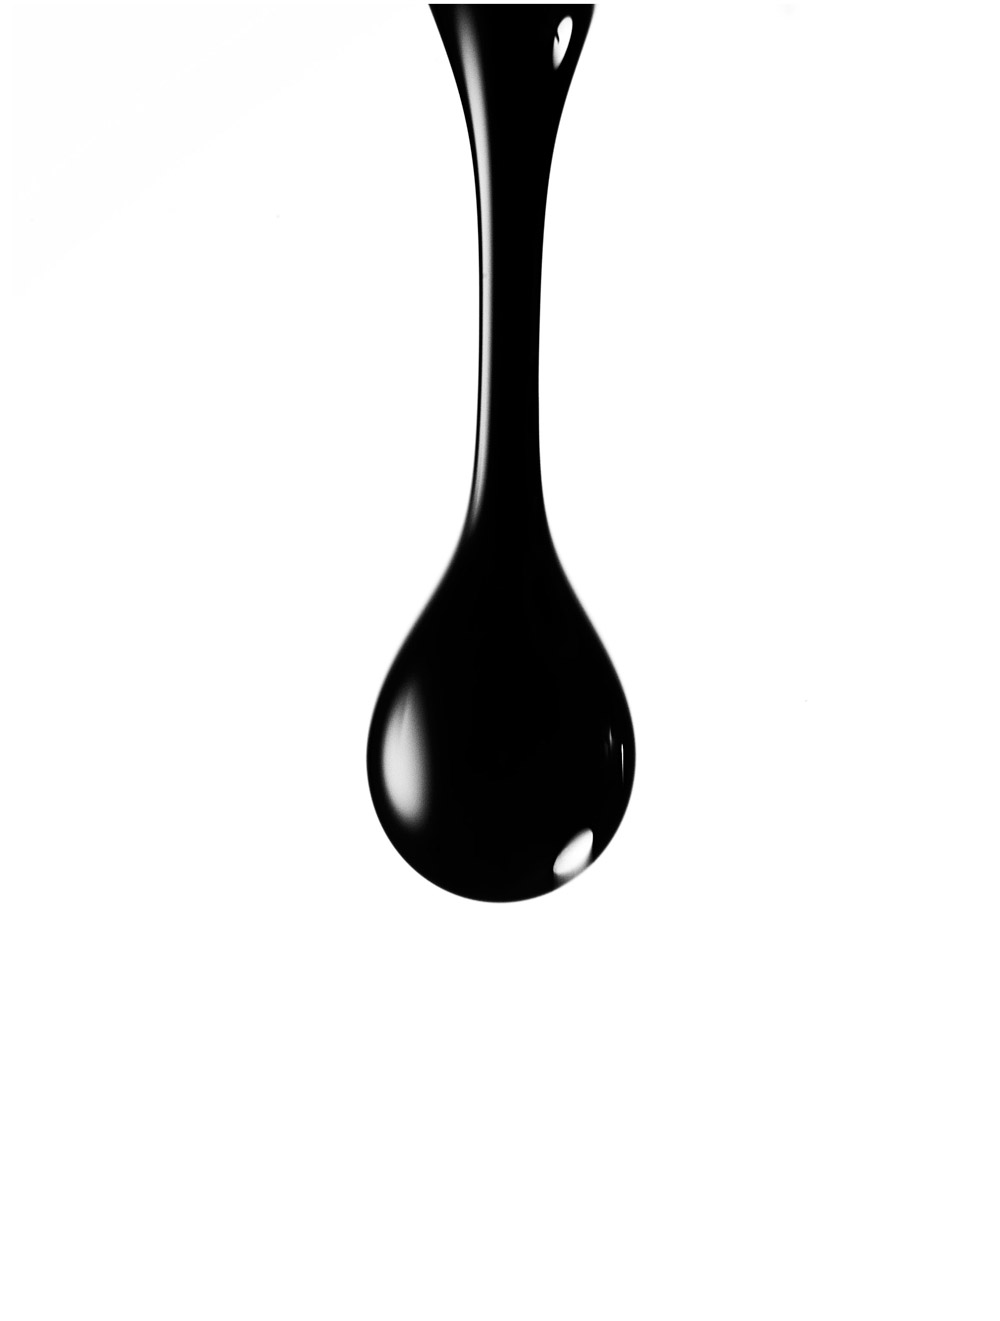 The oil droplet that made the cover.